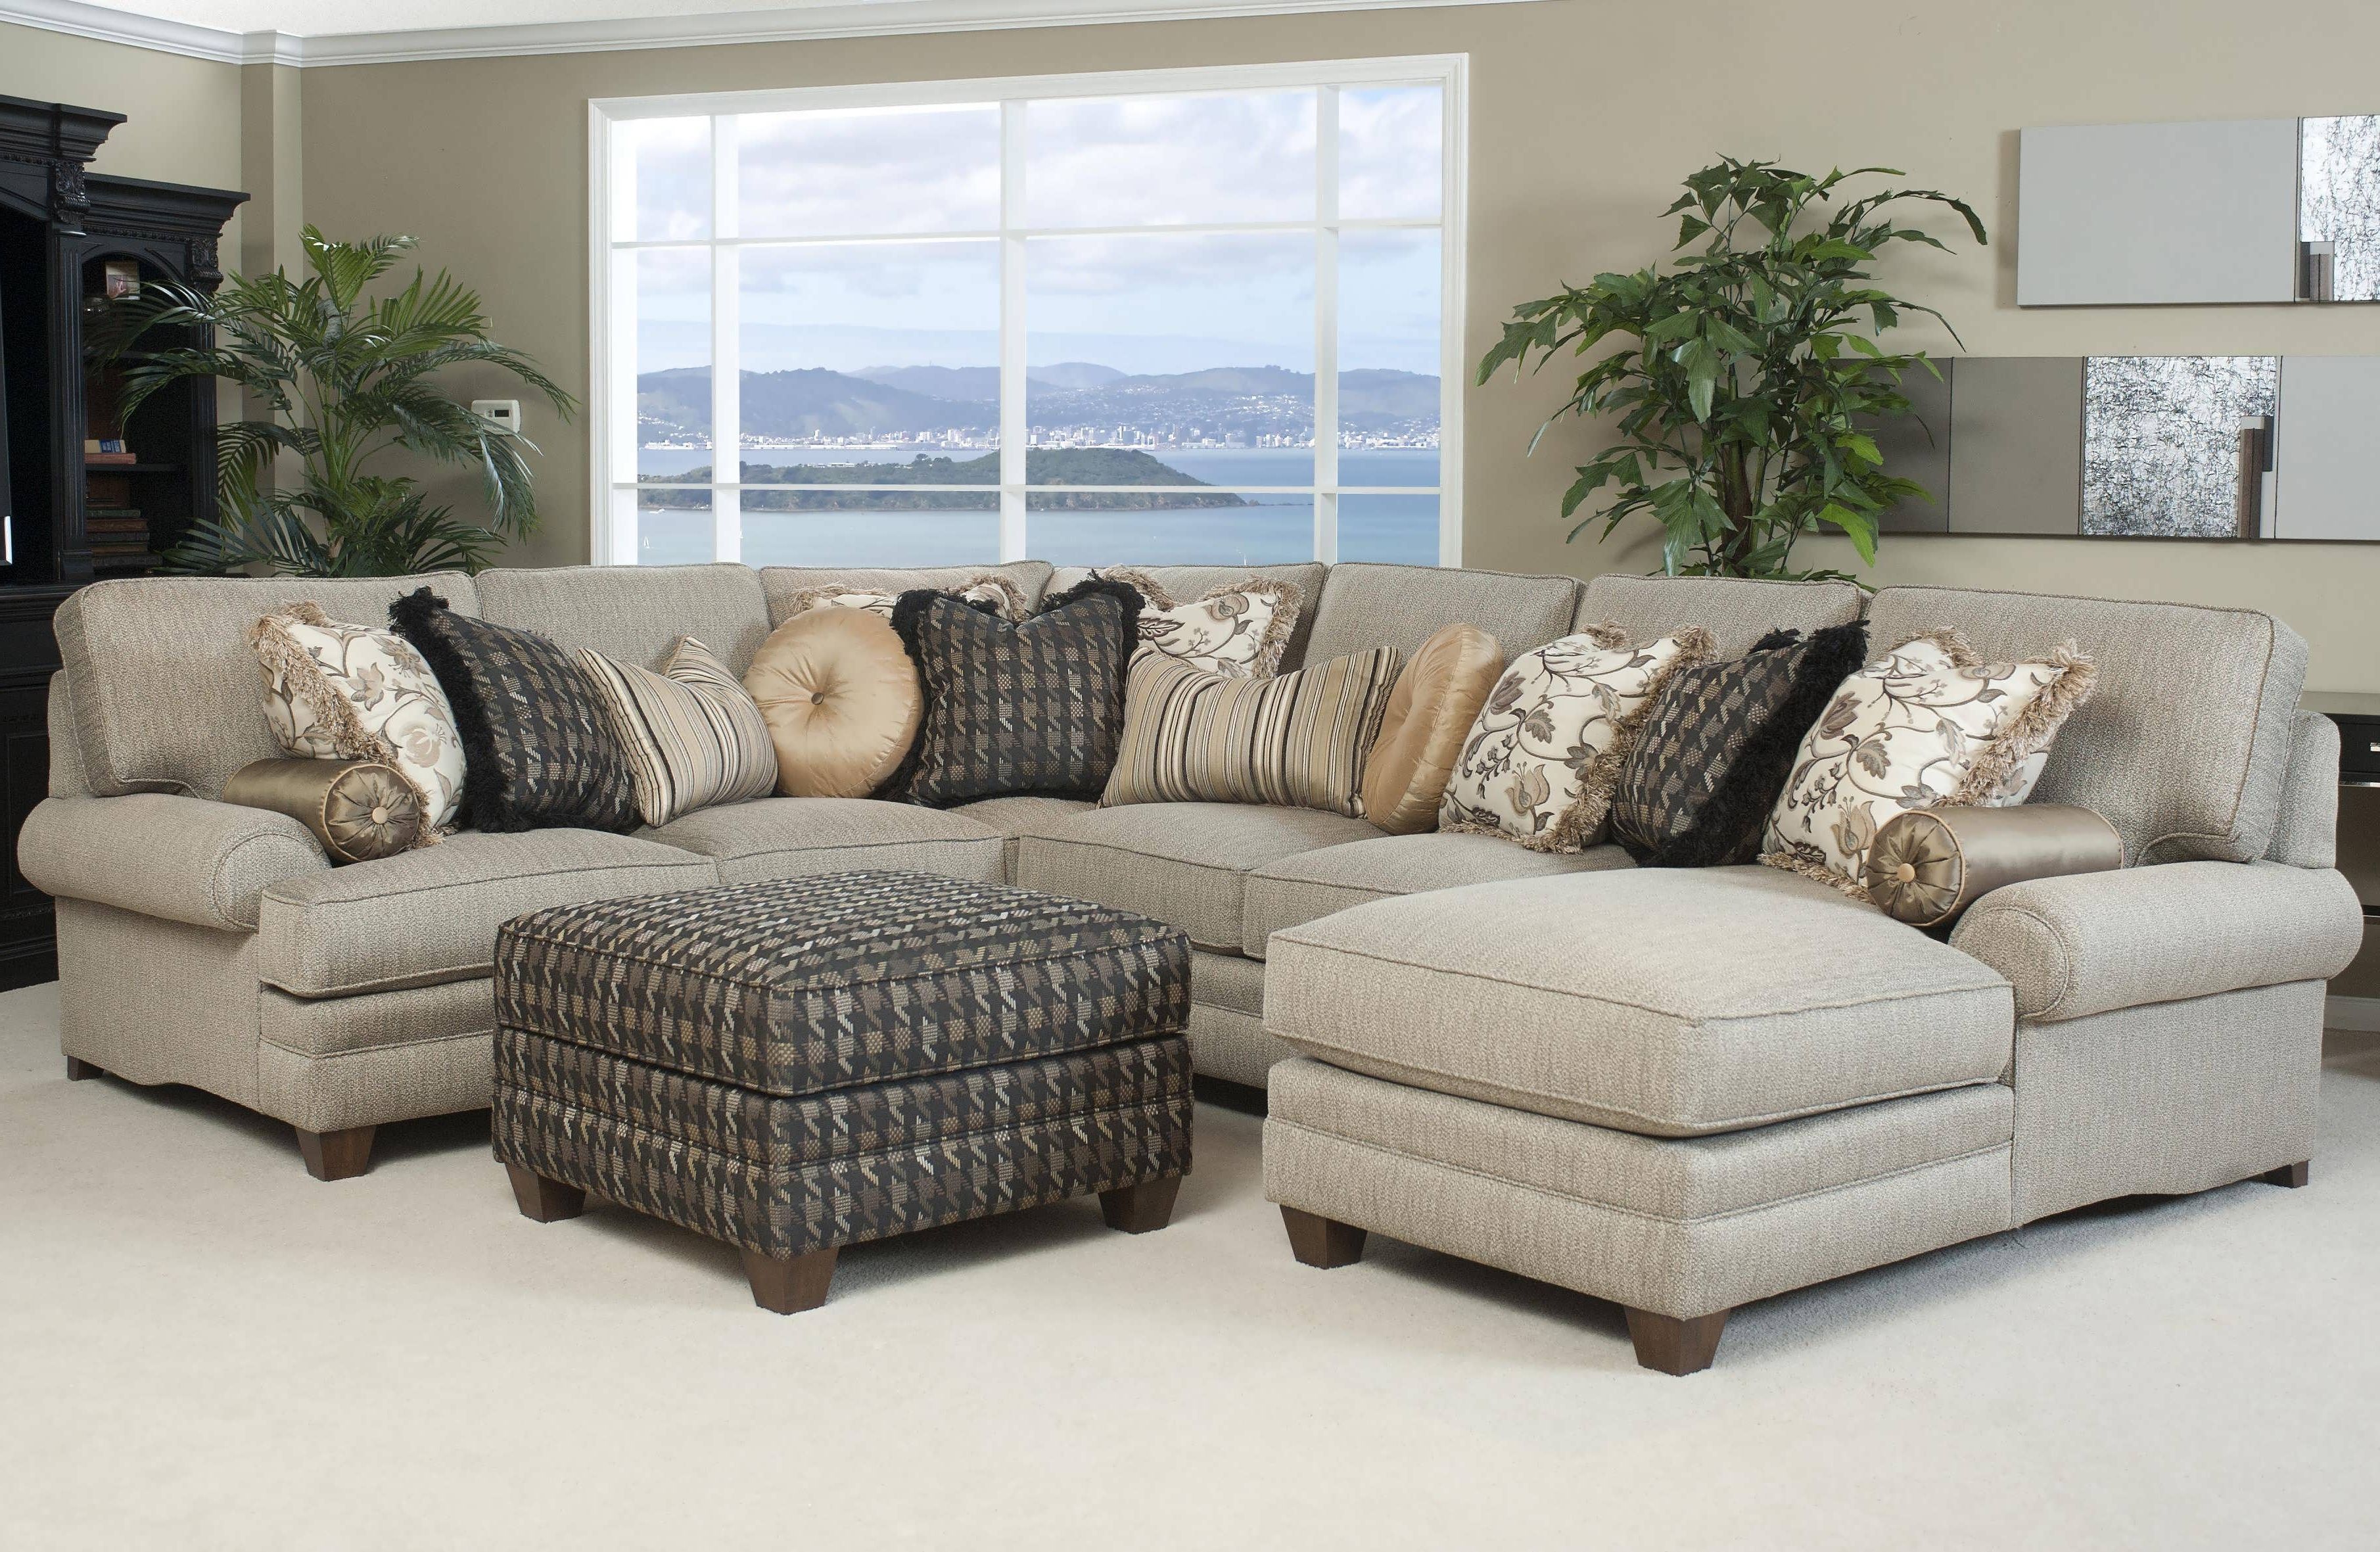 Sofa : Couches L Sofa Microfiber Sectional White Sectional Small Intended For Widely Used Chaise Lounge Sectionals (View 14 of 15)